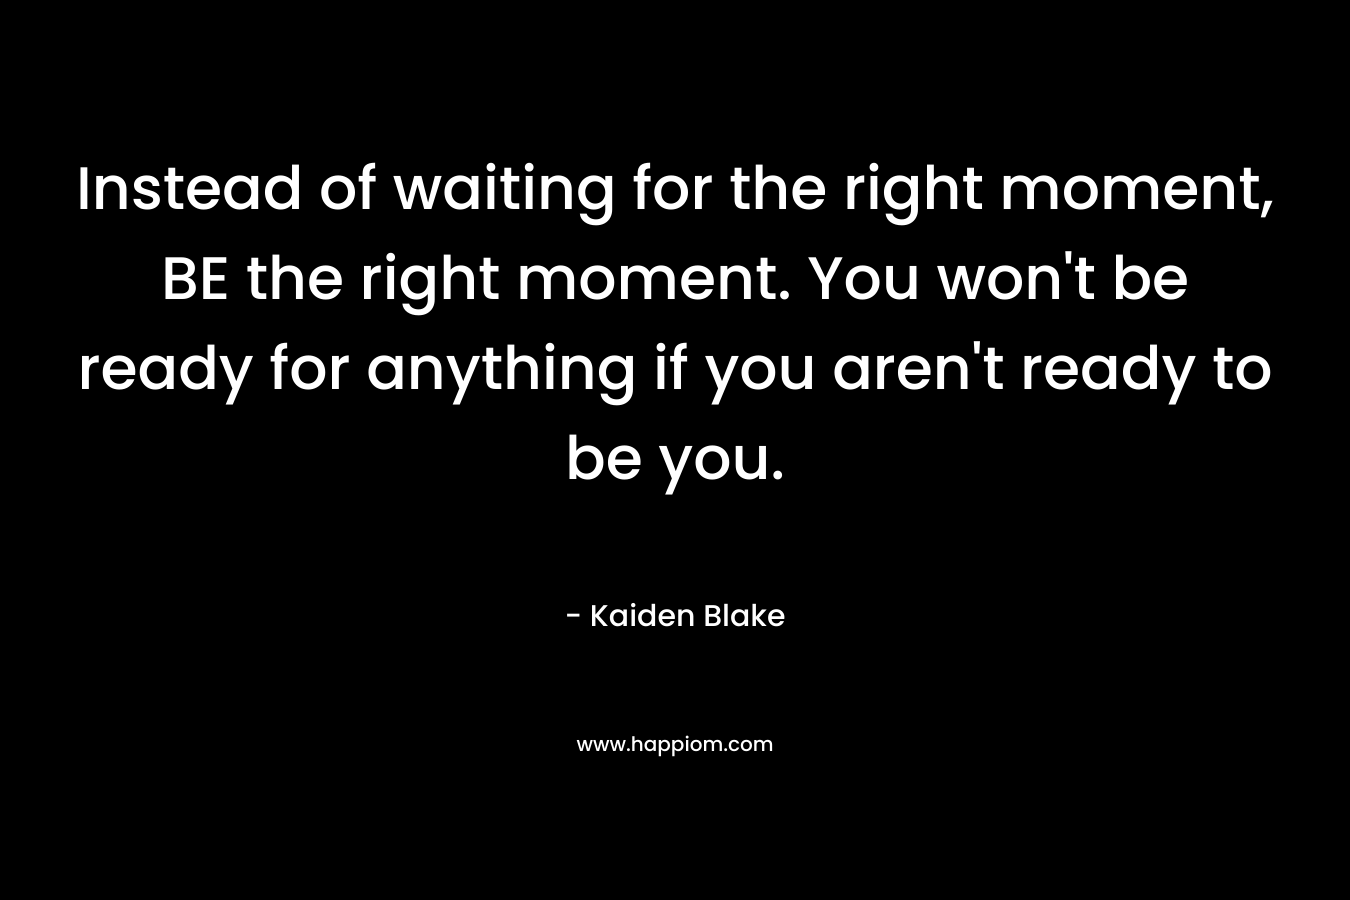 Instead of waiting for the right moment, BE the right moment. You won't be ready for anything if you aren't ready to be you.